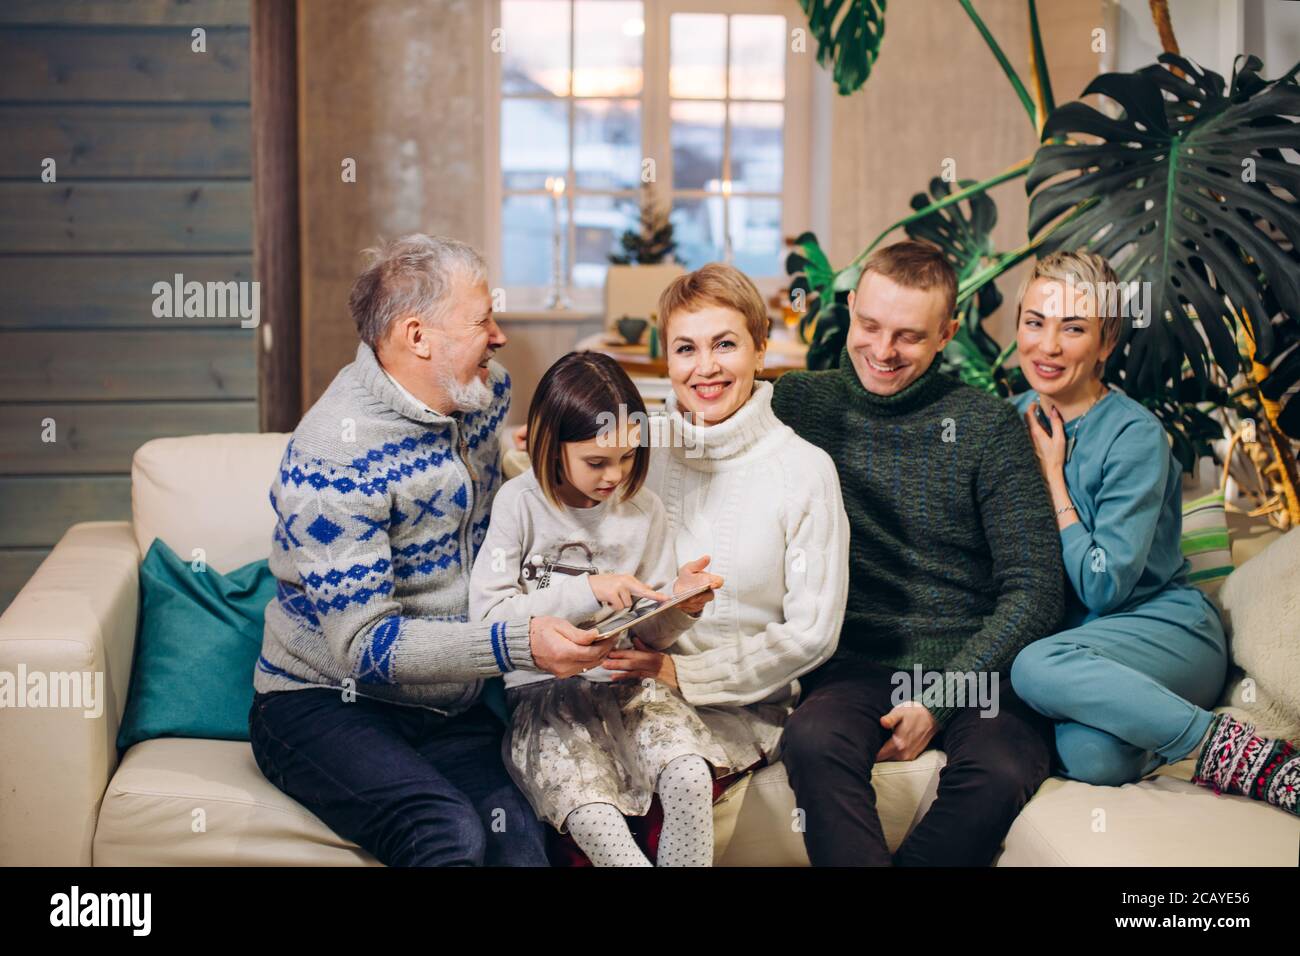 little girl is holding photo album in her hands while her relatives are smiling. close up shot. Stock Photo